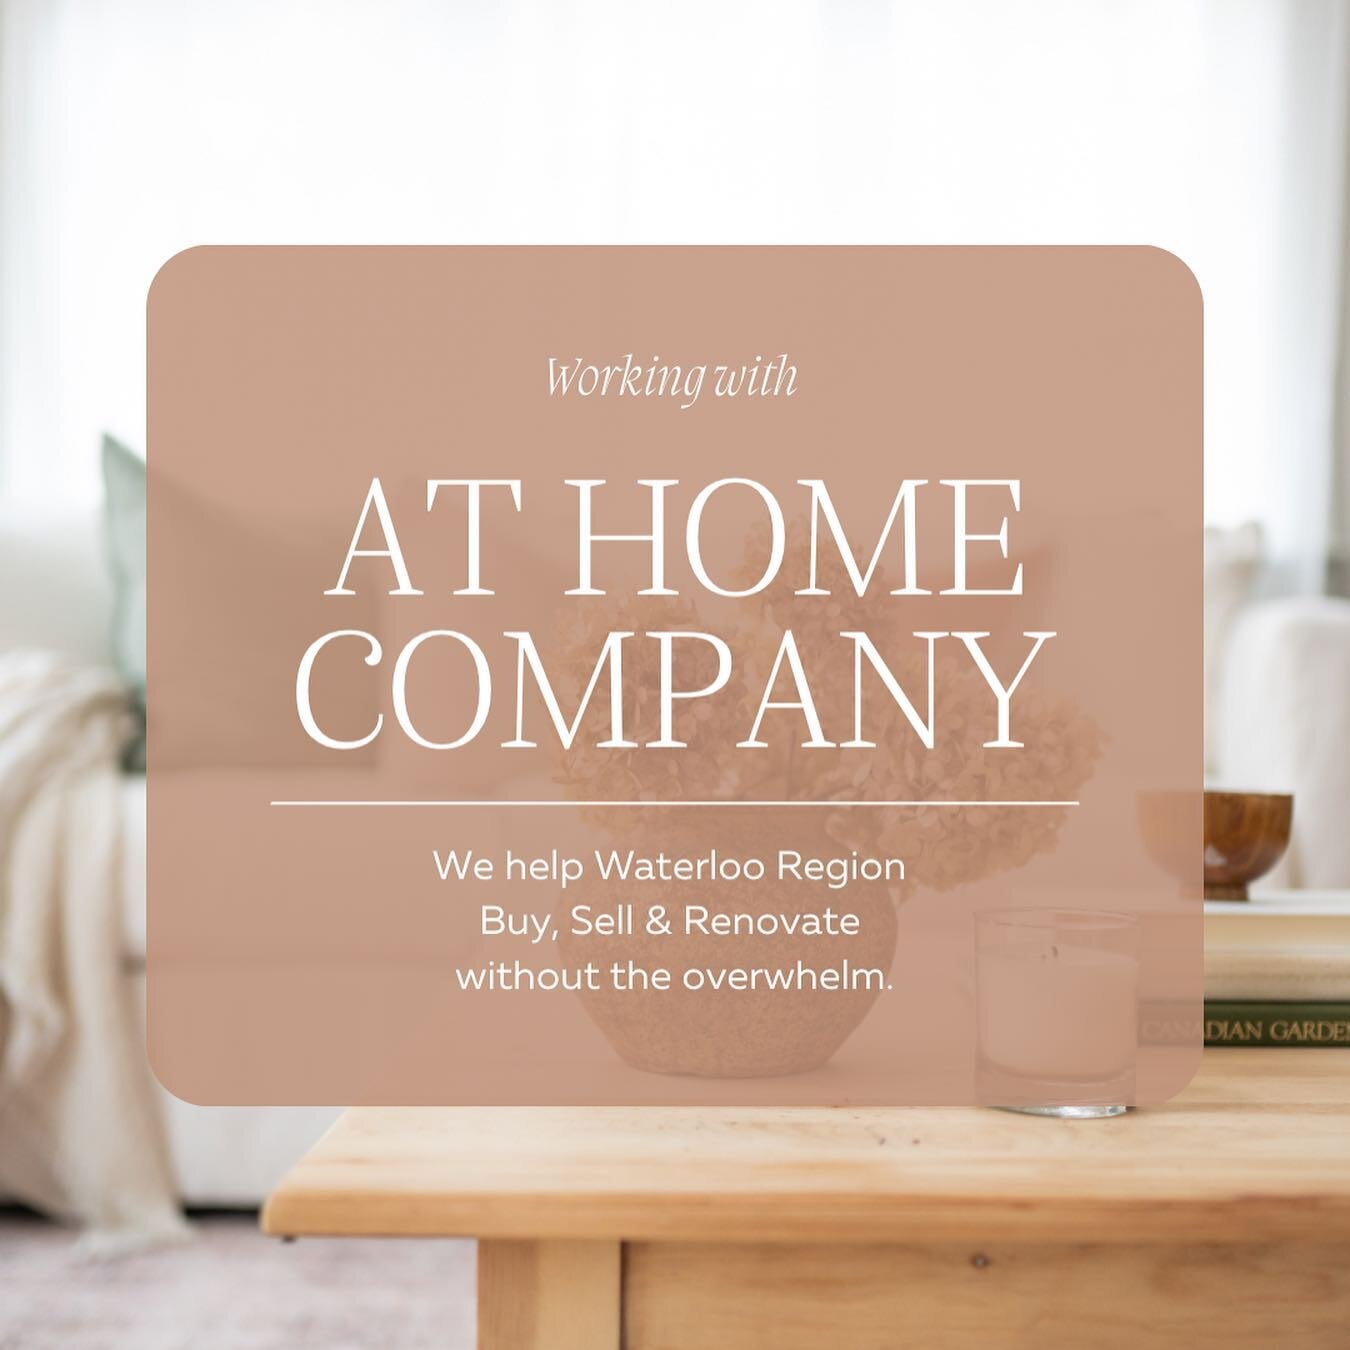 Working with At Home Co. 

You can swipe though all we offer, but at the end of the day, our goal is to take care of you and your home. 

We are where real estate meets design. 

Our team goes beyond just the sale by helping with cleaning, organizati